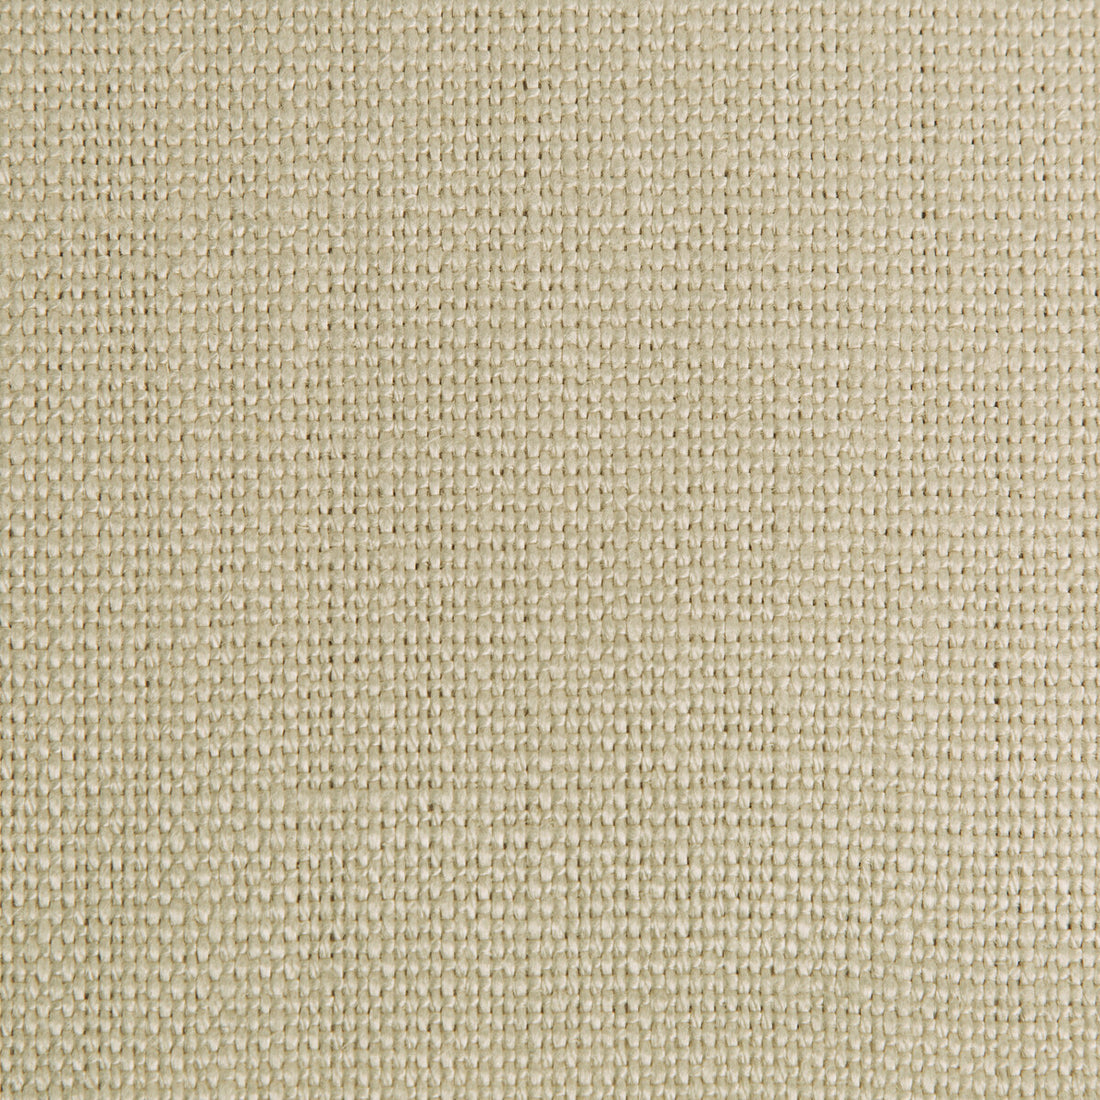 Stone Harbor fabric in marshmallow color - pattern 27591.1606.0 - by Kravet Basics in the The Complete Linen IV collection